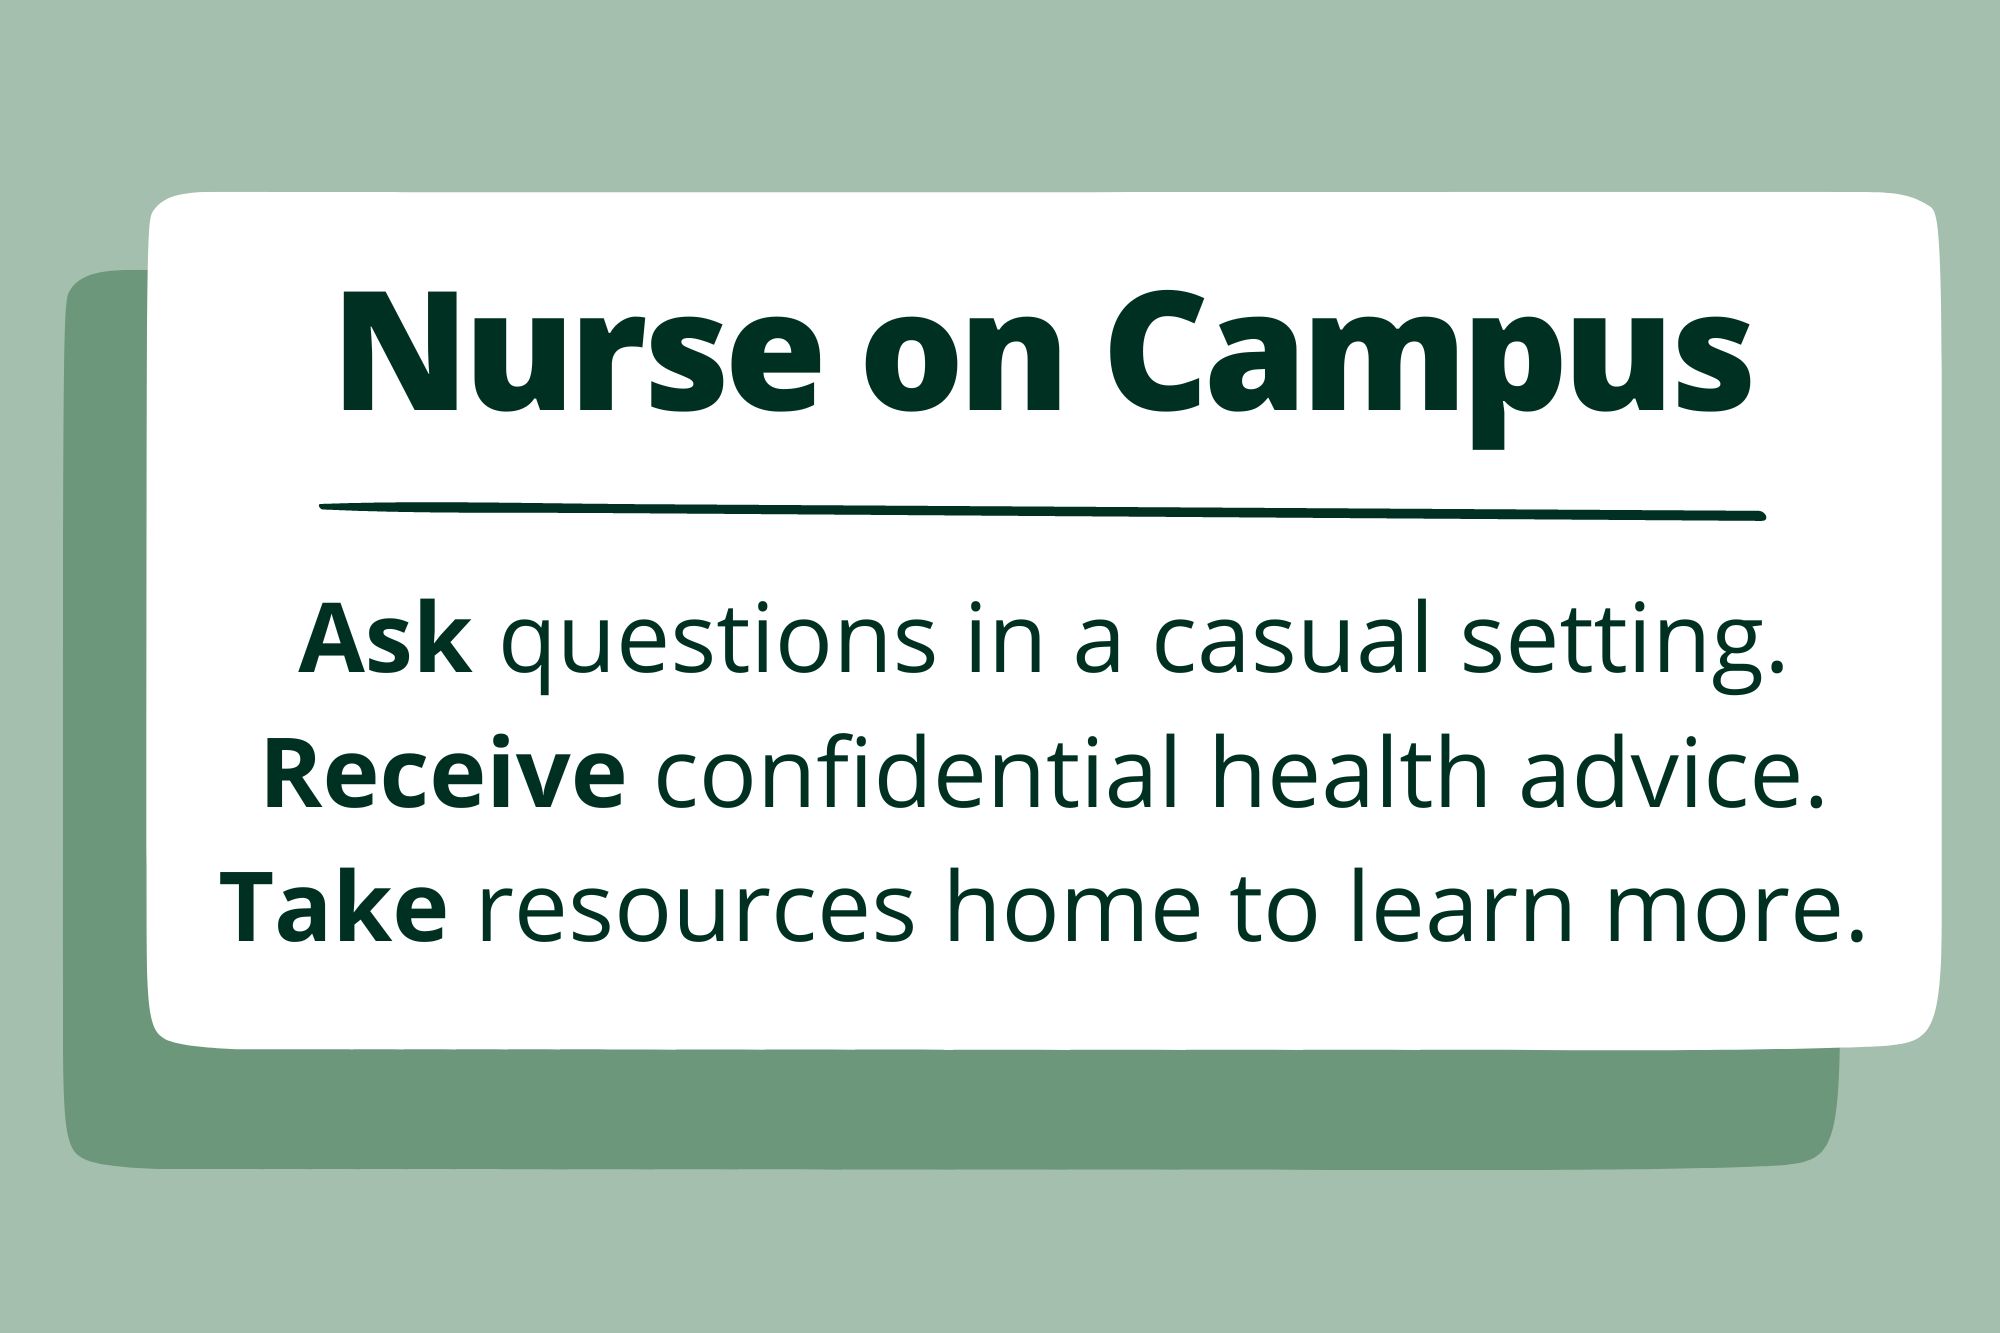 Nurse on Campus Ask questions in a casual setting. Receive confidential health advice. Take resources home to learn more.